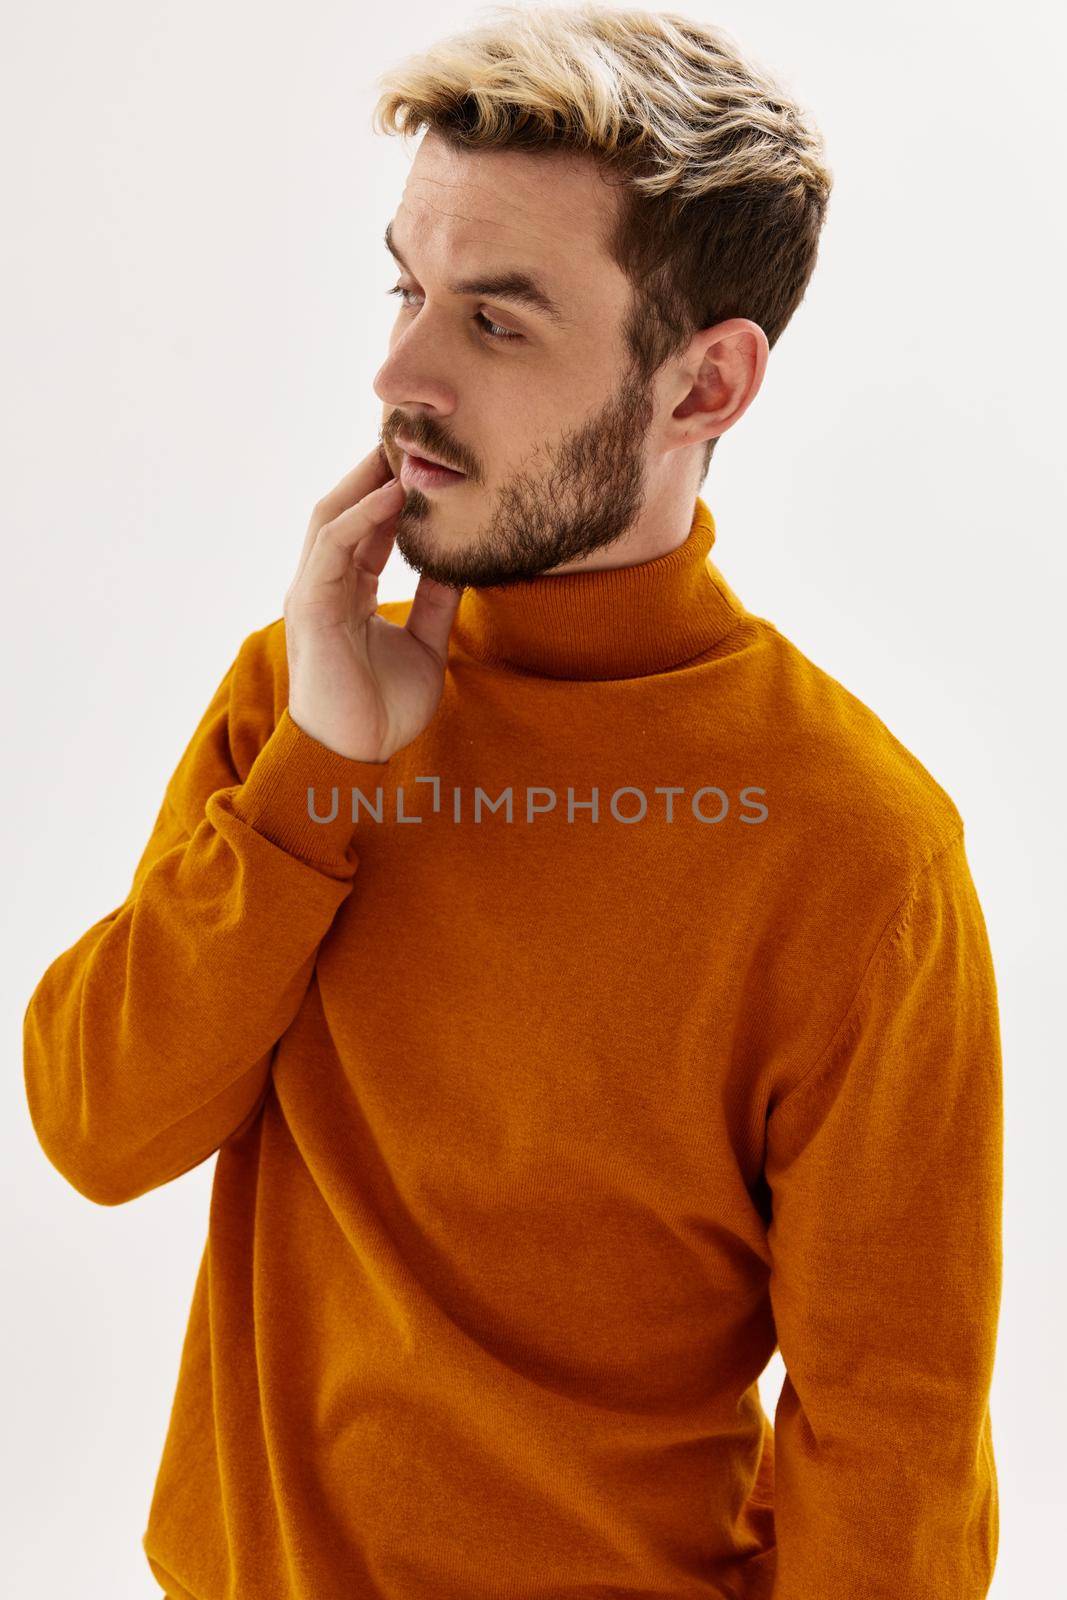 man in a sweater looking to the side fashionable hairstyle mens clothing by SHOTPRIME